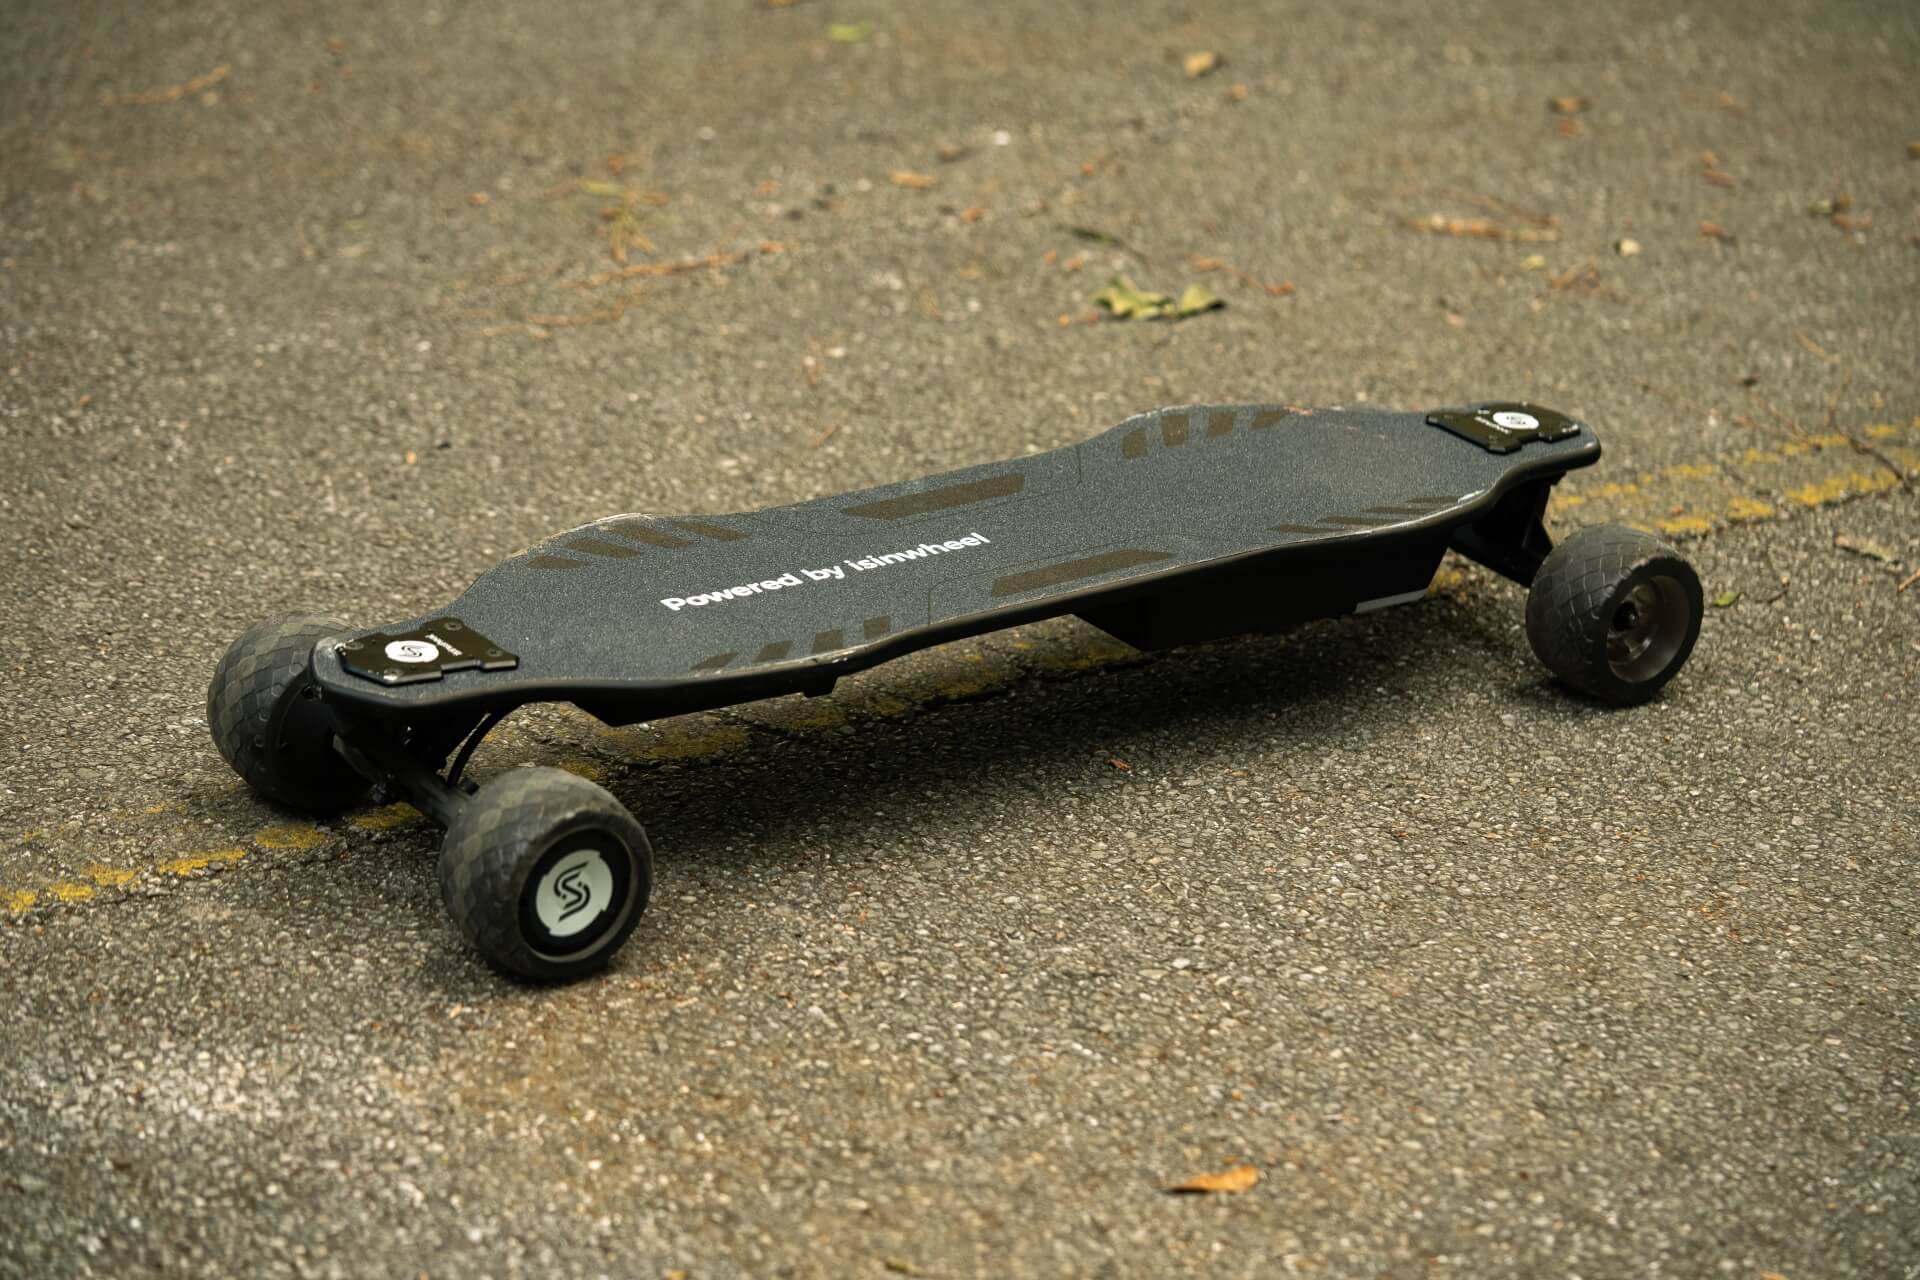 How To Ride an Electric Skateboard